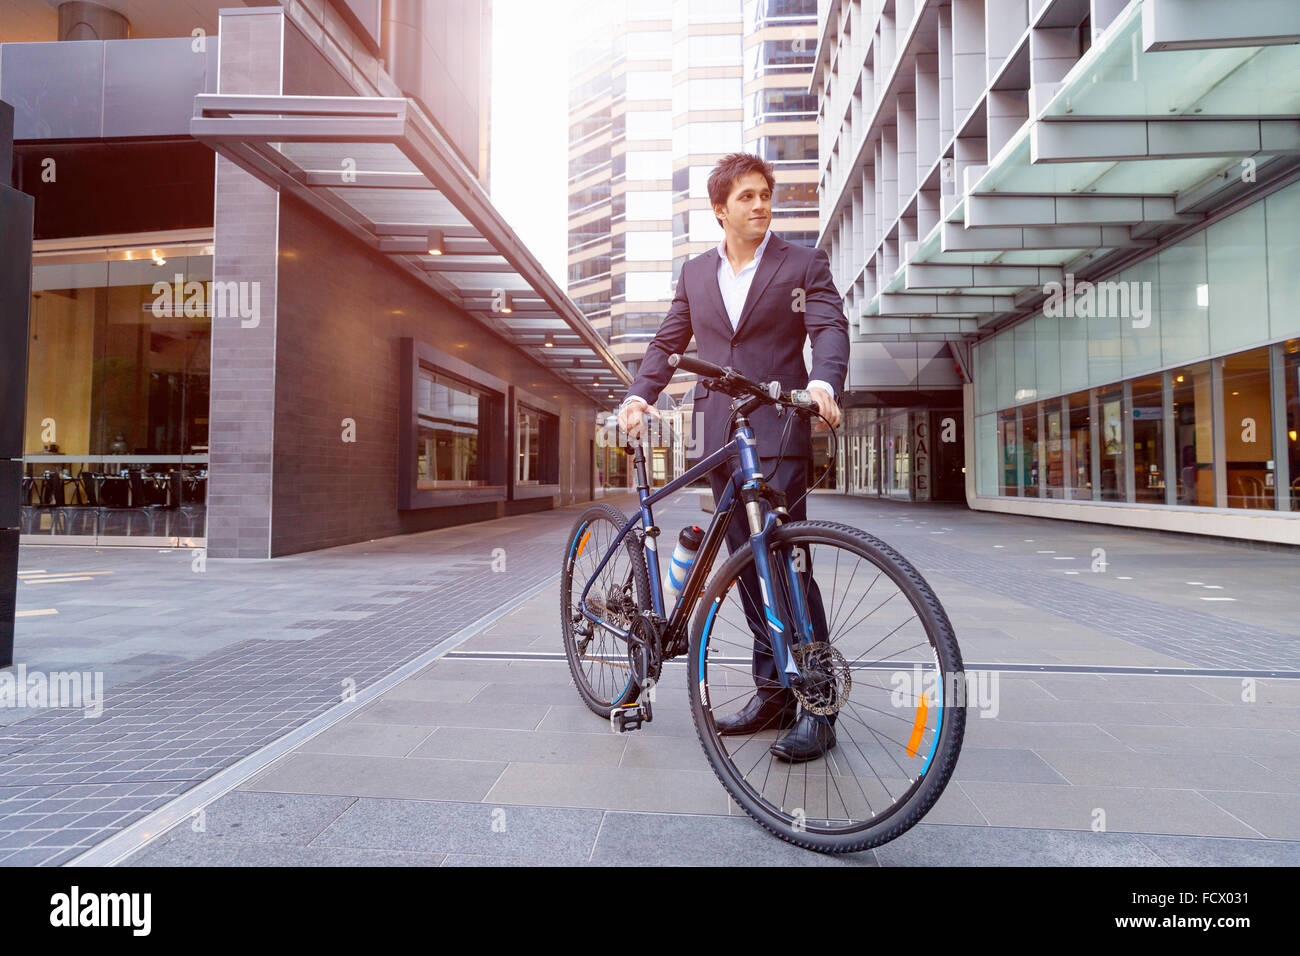 Successful businessman in suit with bicycle in city Stock Photo